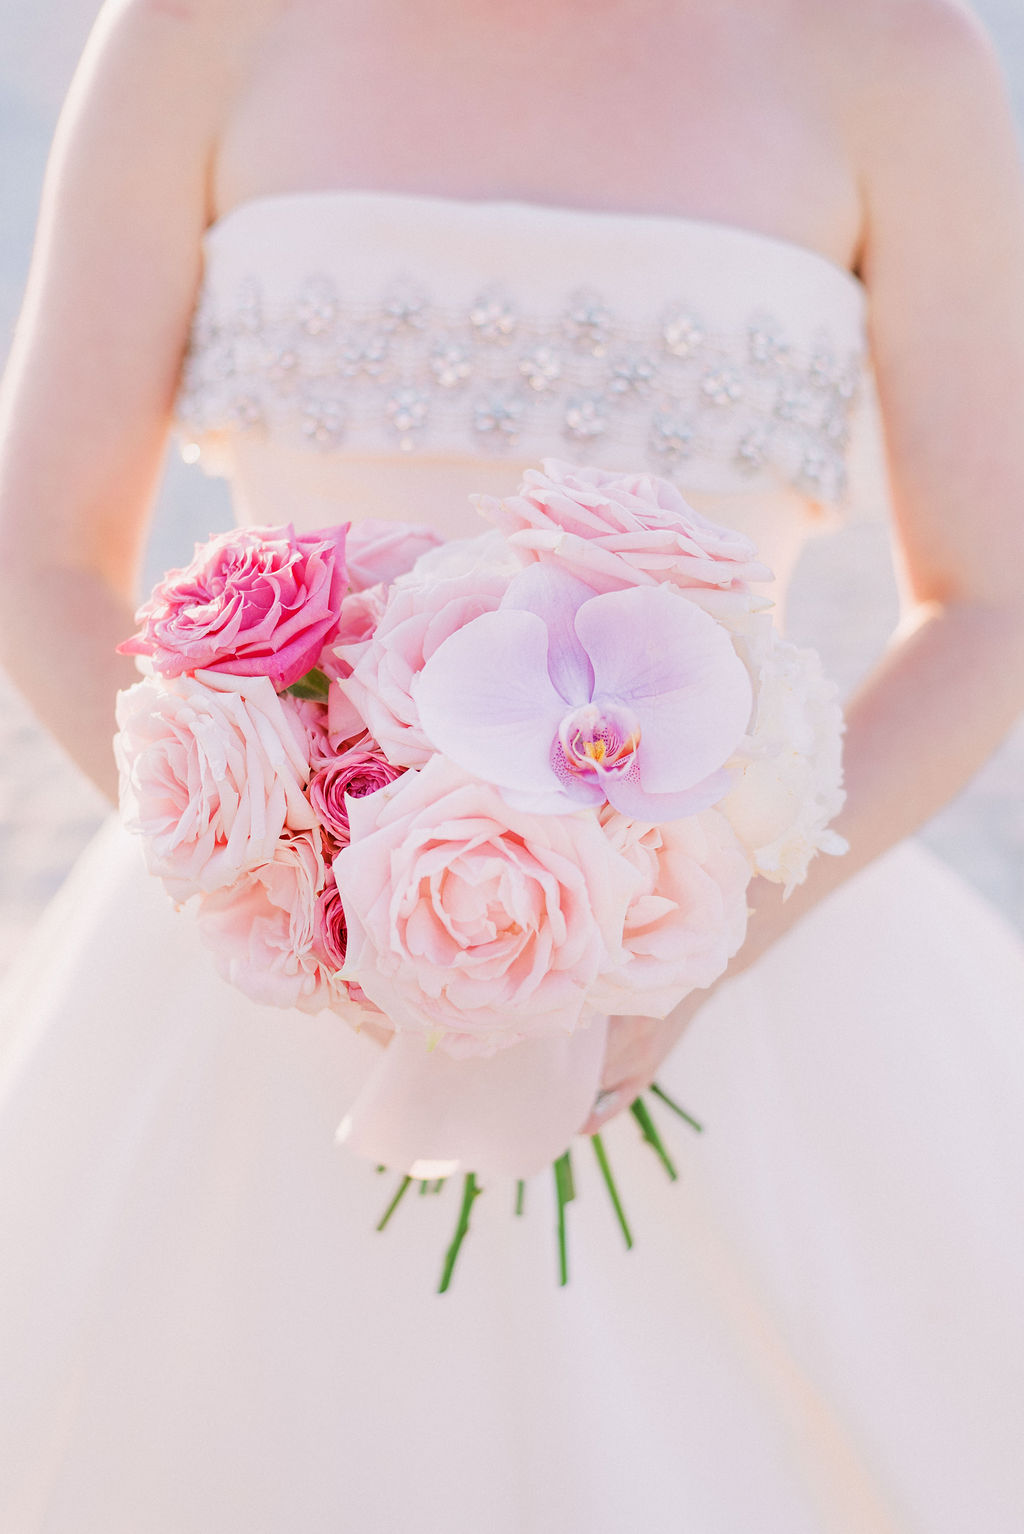 Pink bridal bouquet at a French château wedding planned by Fête in France